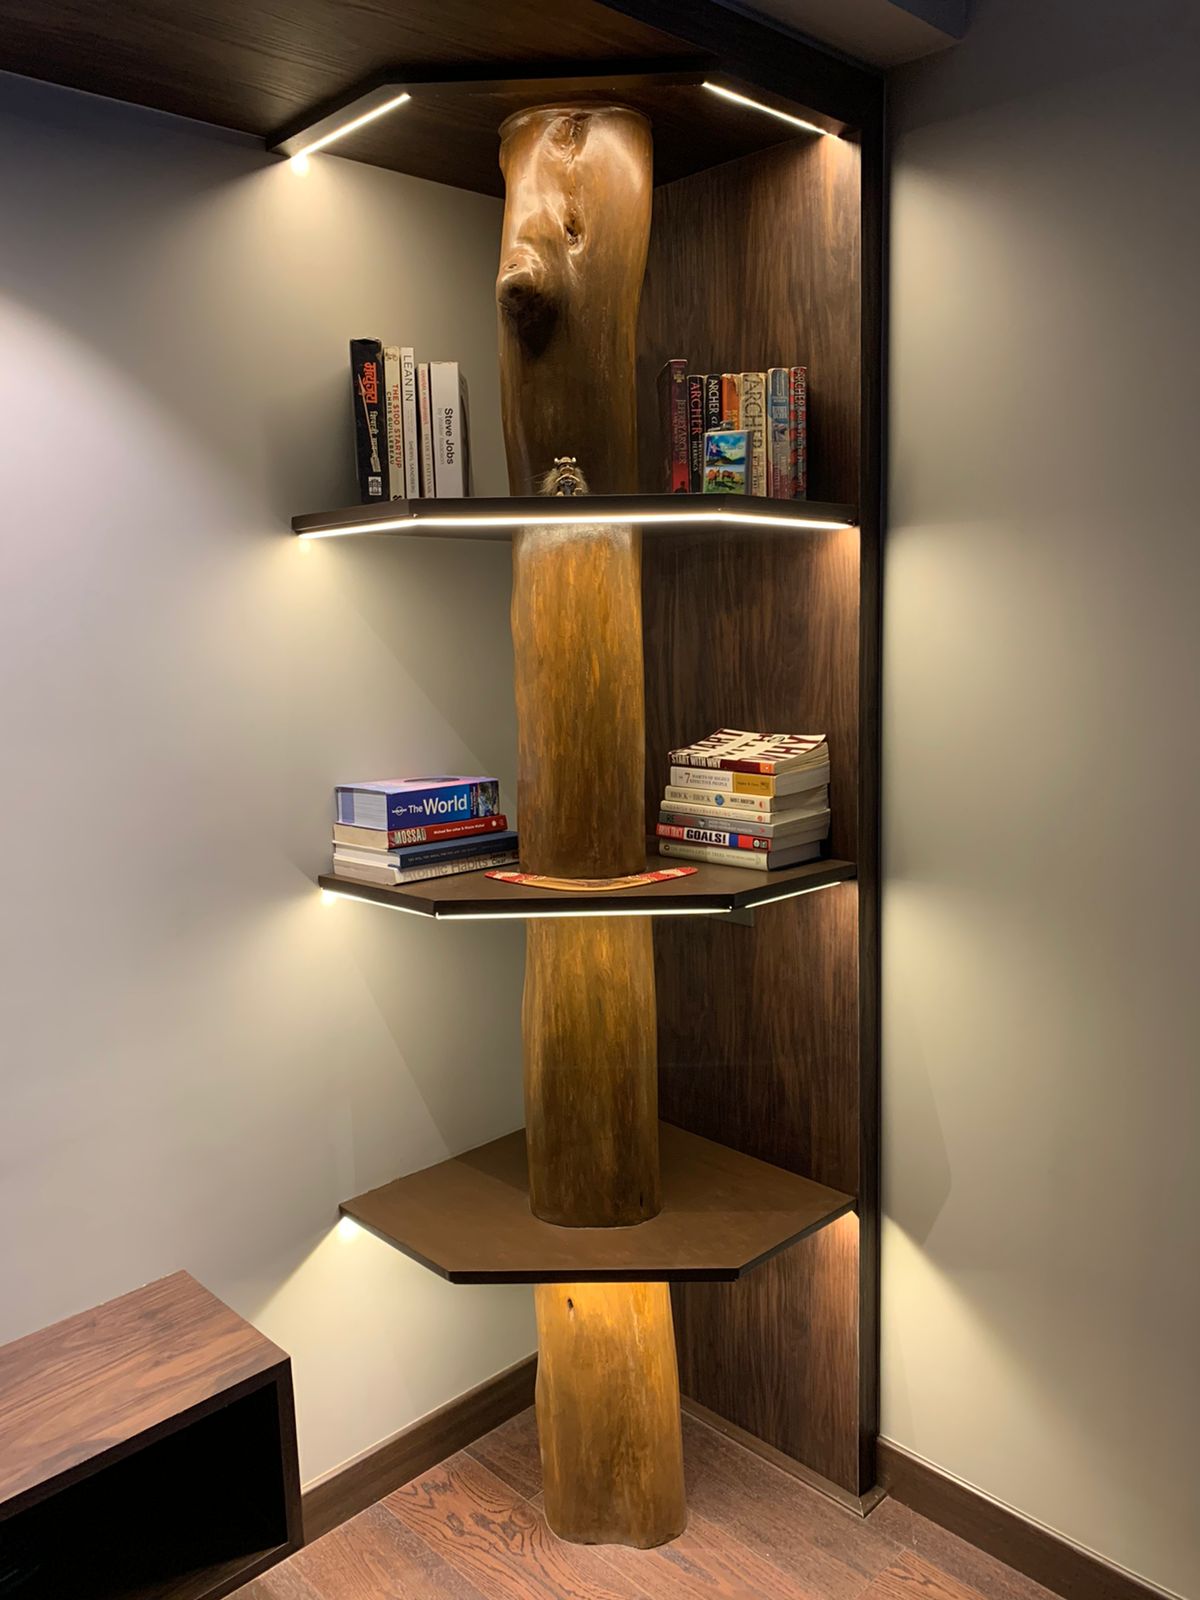 A book shelf made with using a reclaimed piece of wood.